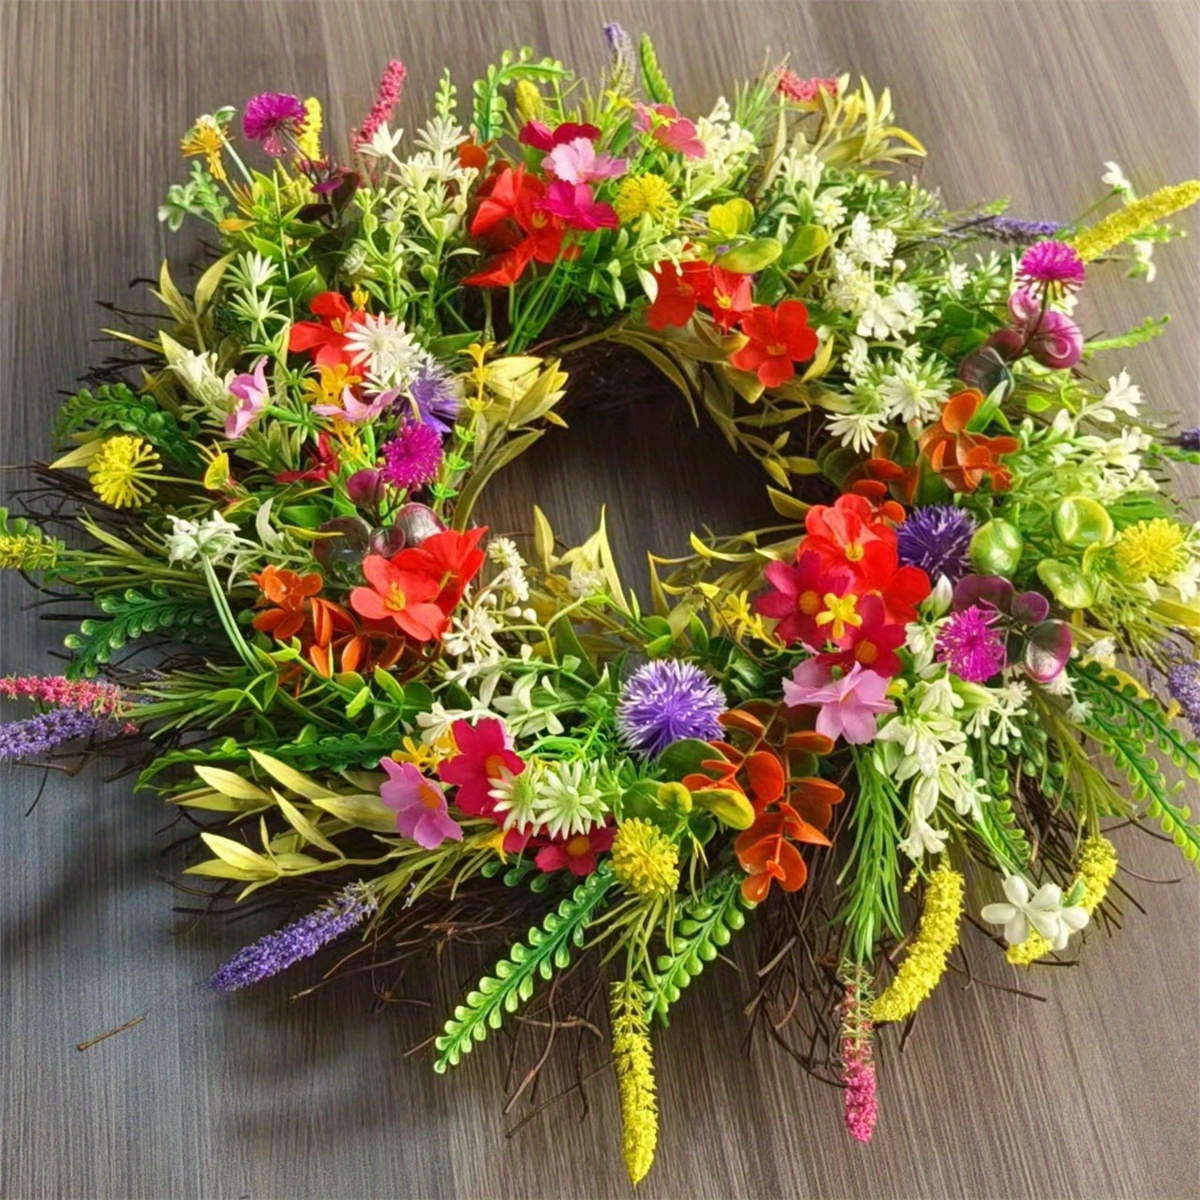 

1pc Artificial Wildflower Wreath Garland 17.71in Faux Flower Hanging Vine Purple Flowers Ivy Spring Garland With Eucalyptus Boston Fern Vine For Sign Board Party Home Decor Birthday Party Gift